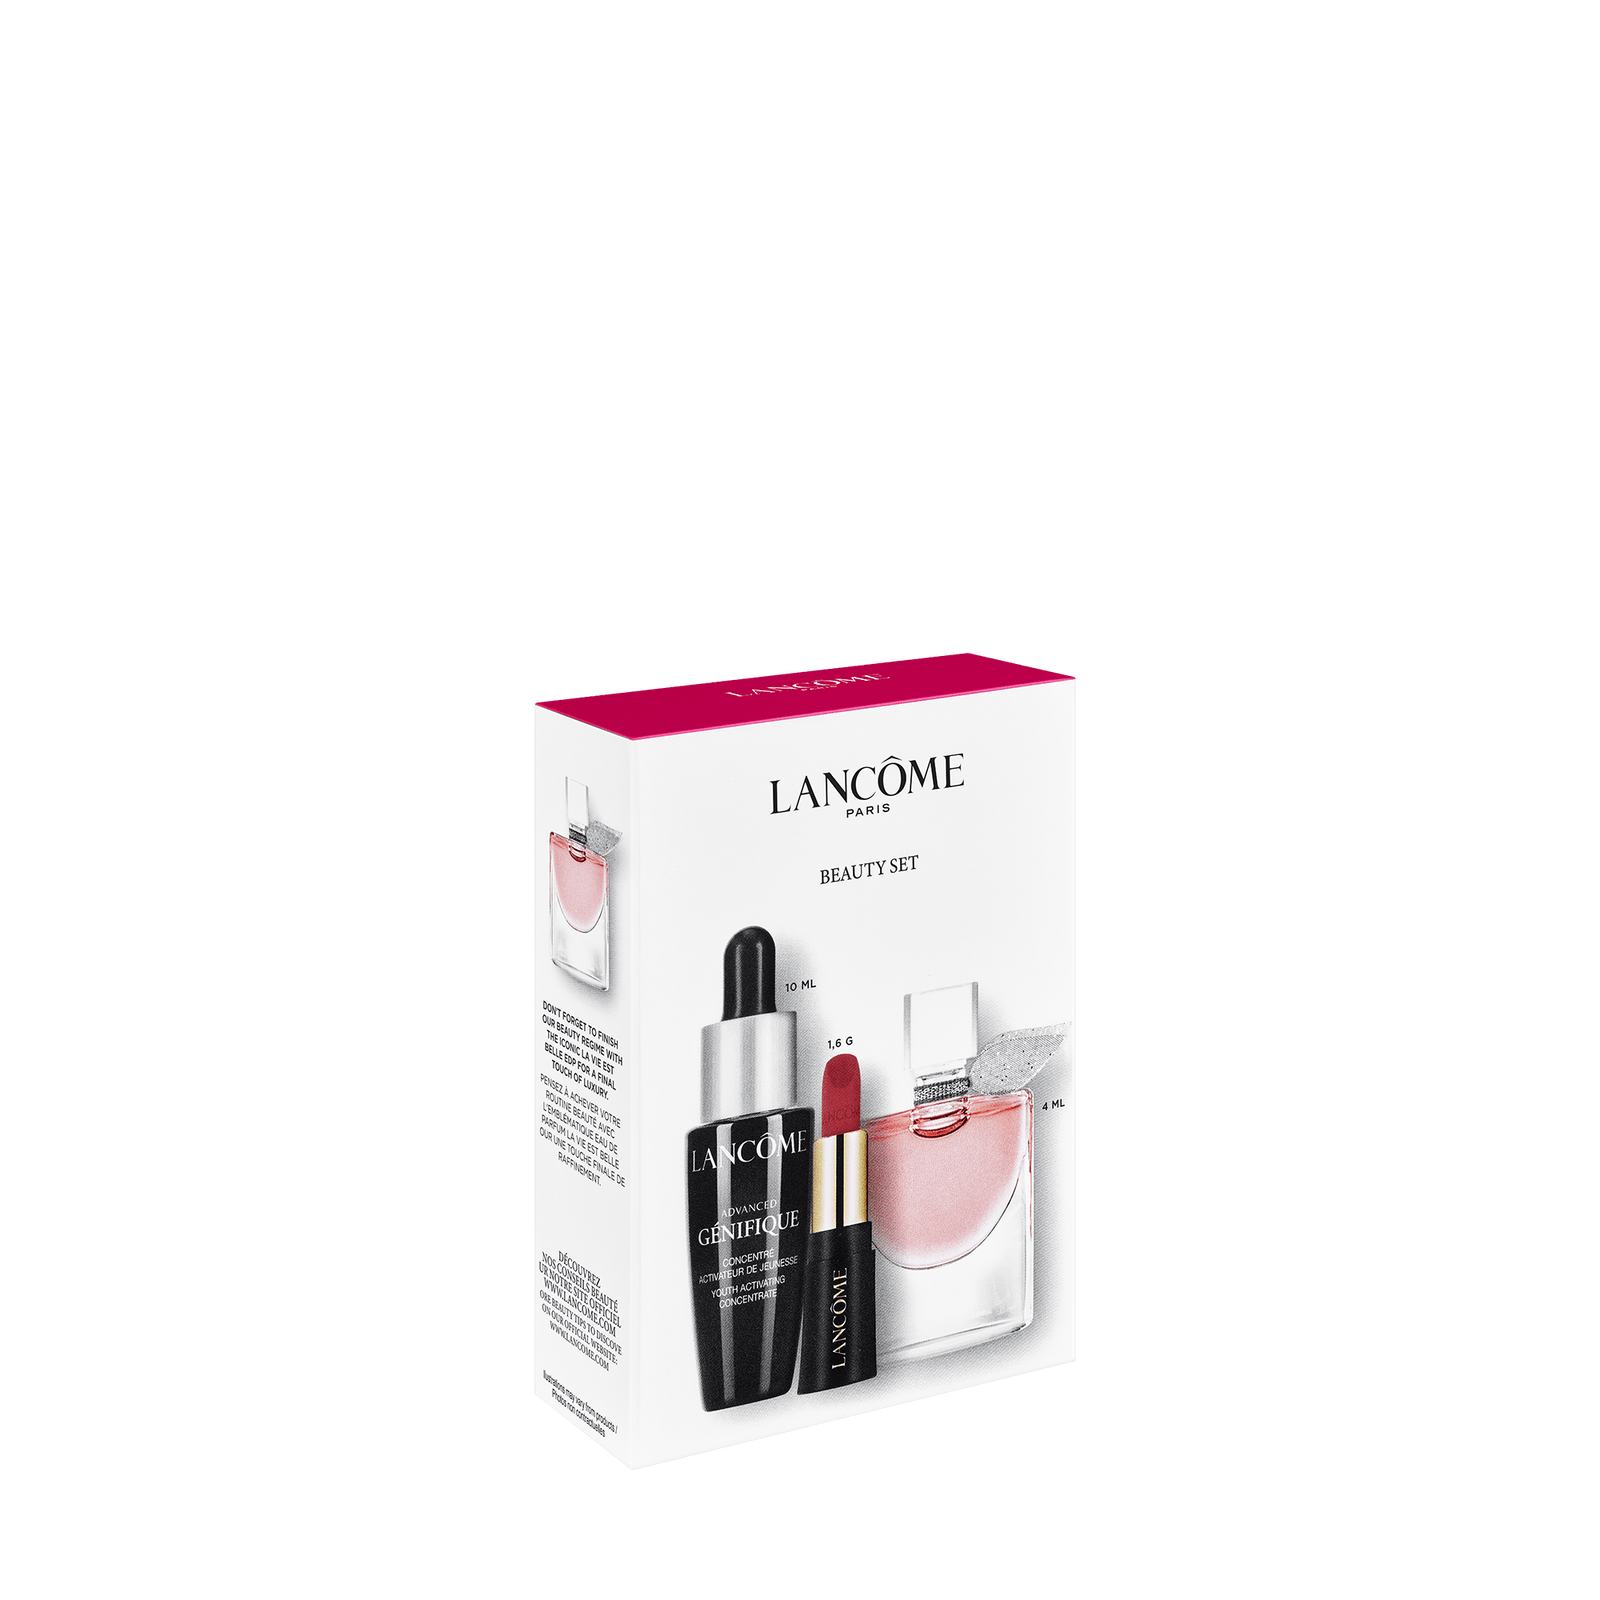 Lancome Free Gift with Purchase